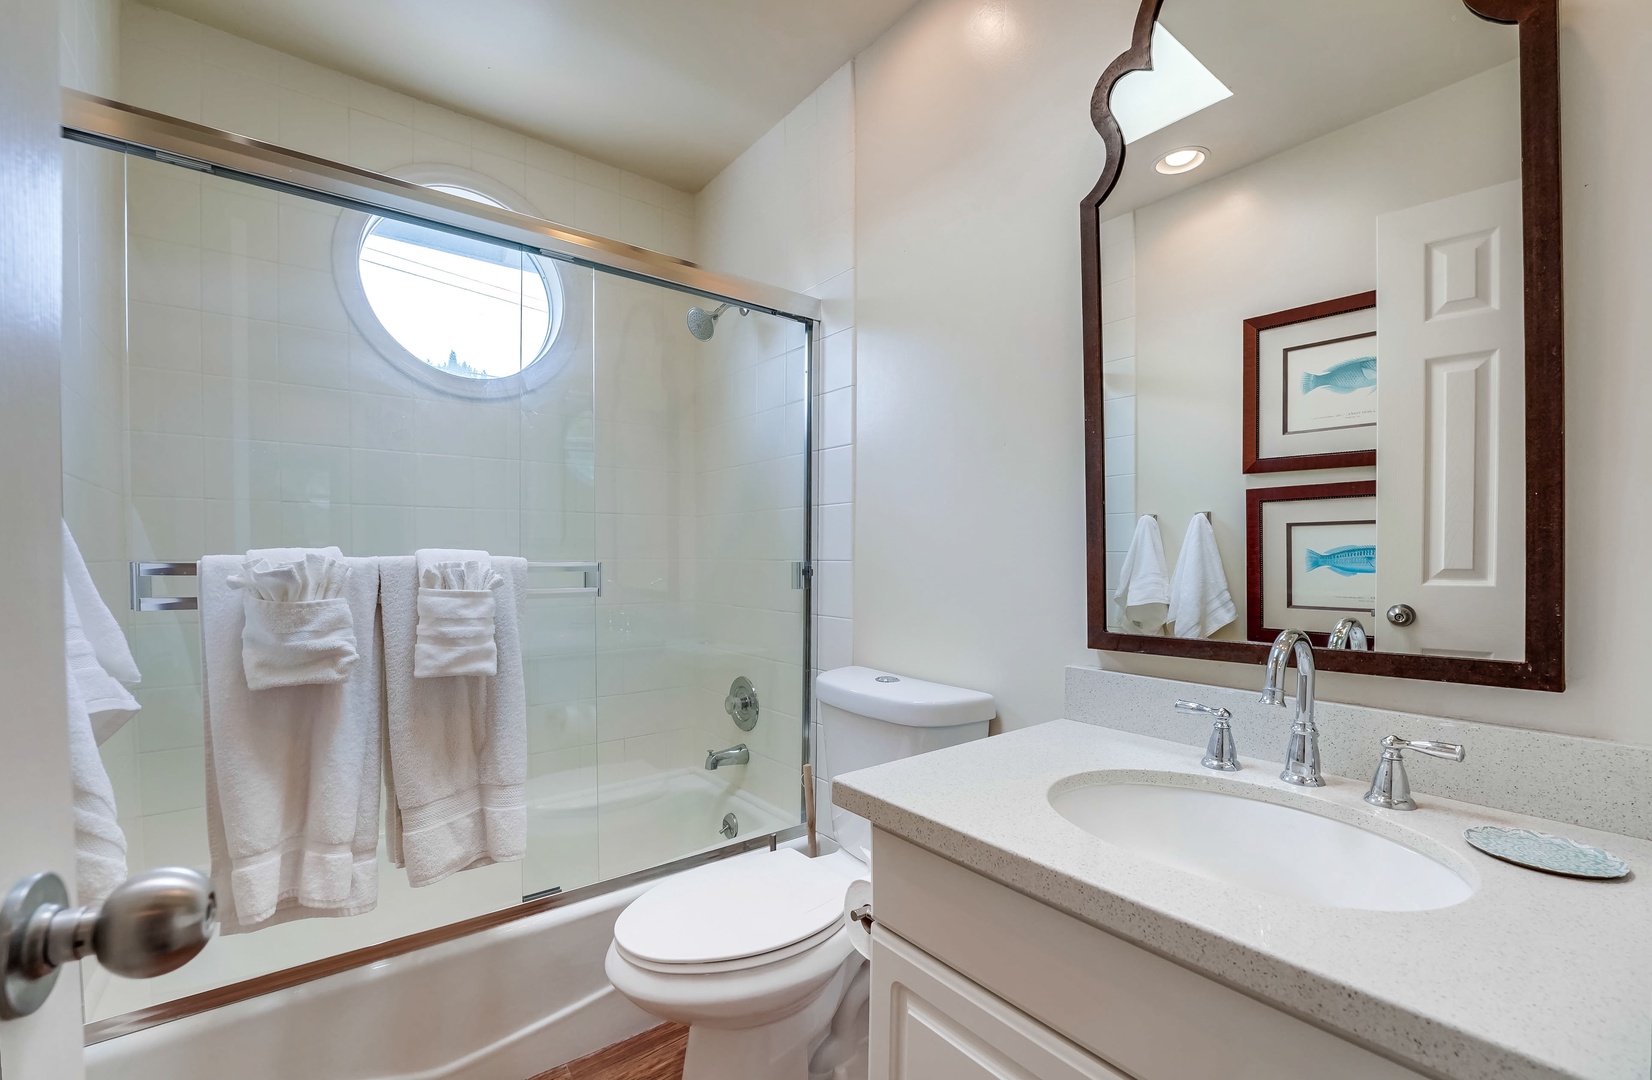 Shared bathroom with tub/shower combo